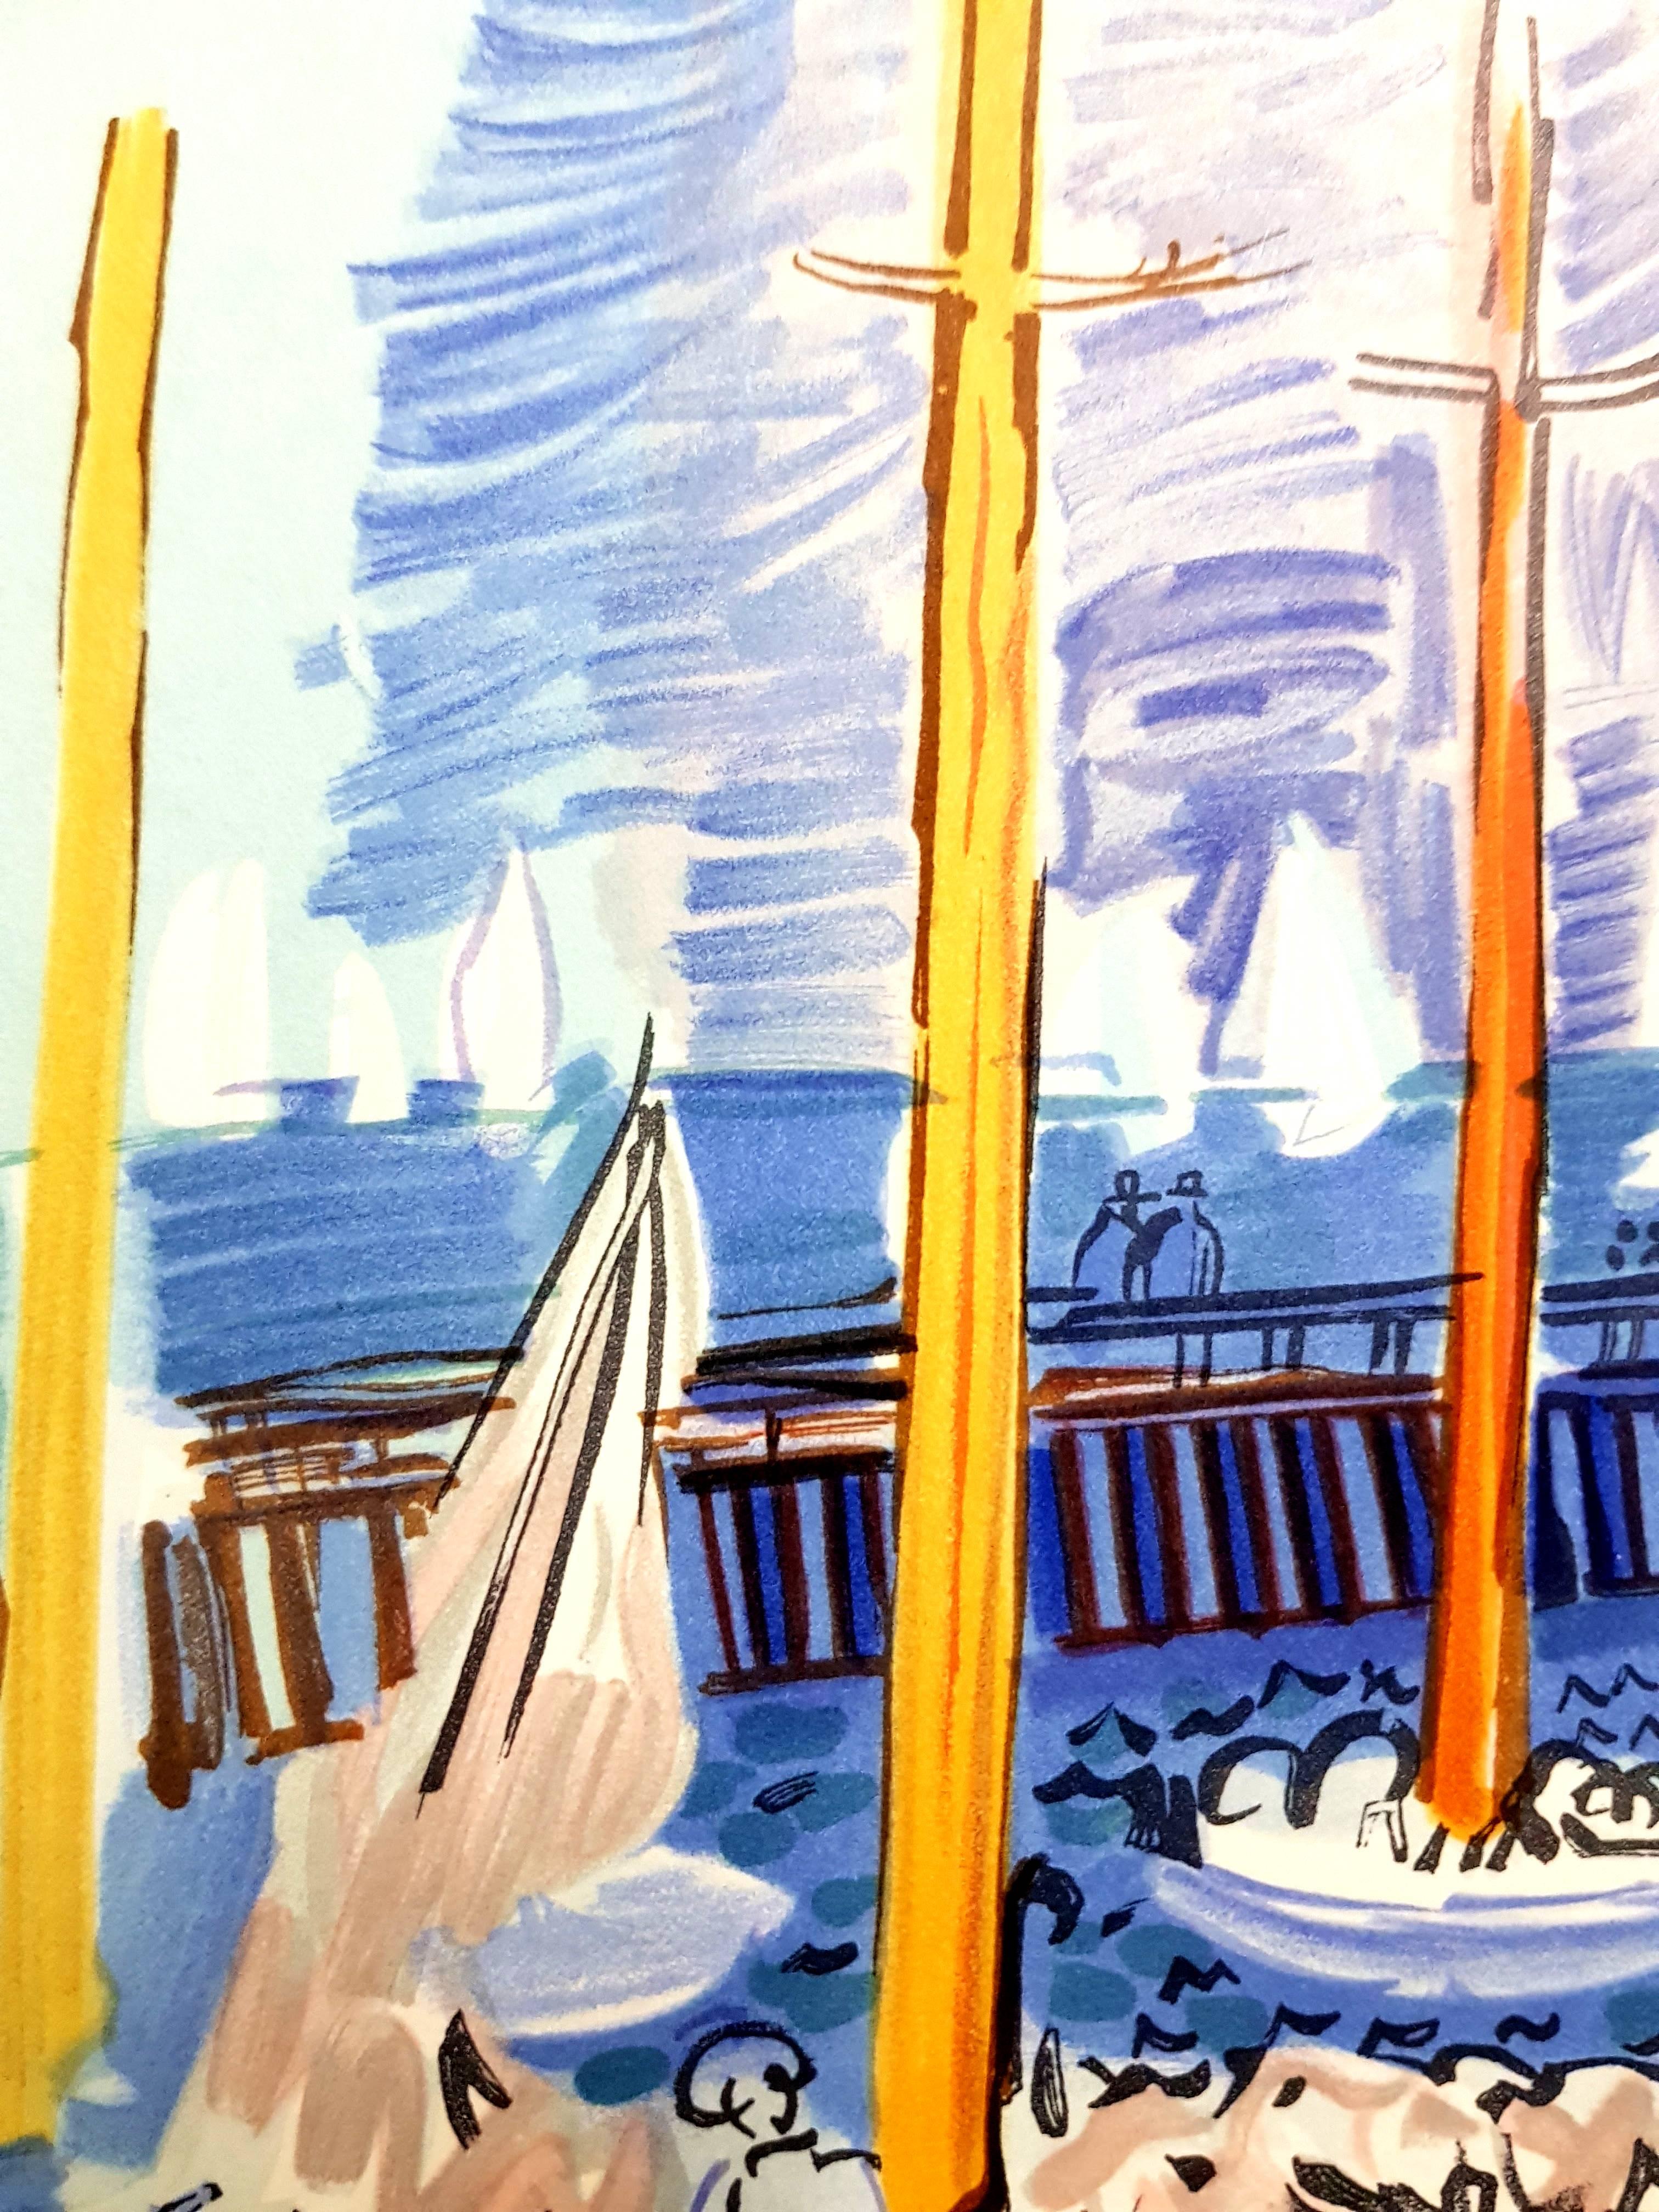 Boats - Lithograph - Fauvist Print by (after) Raoul Dufy